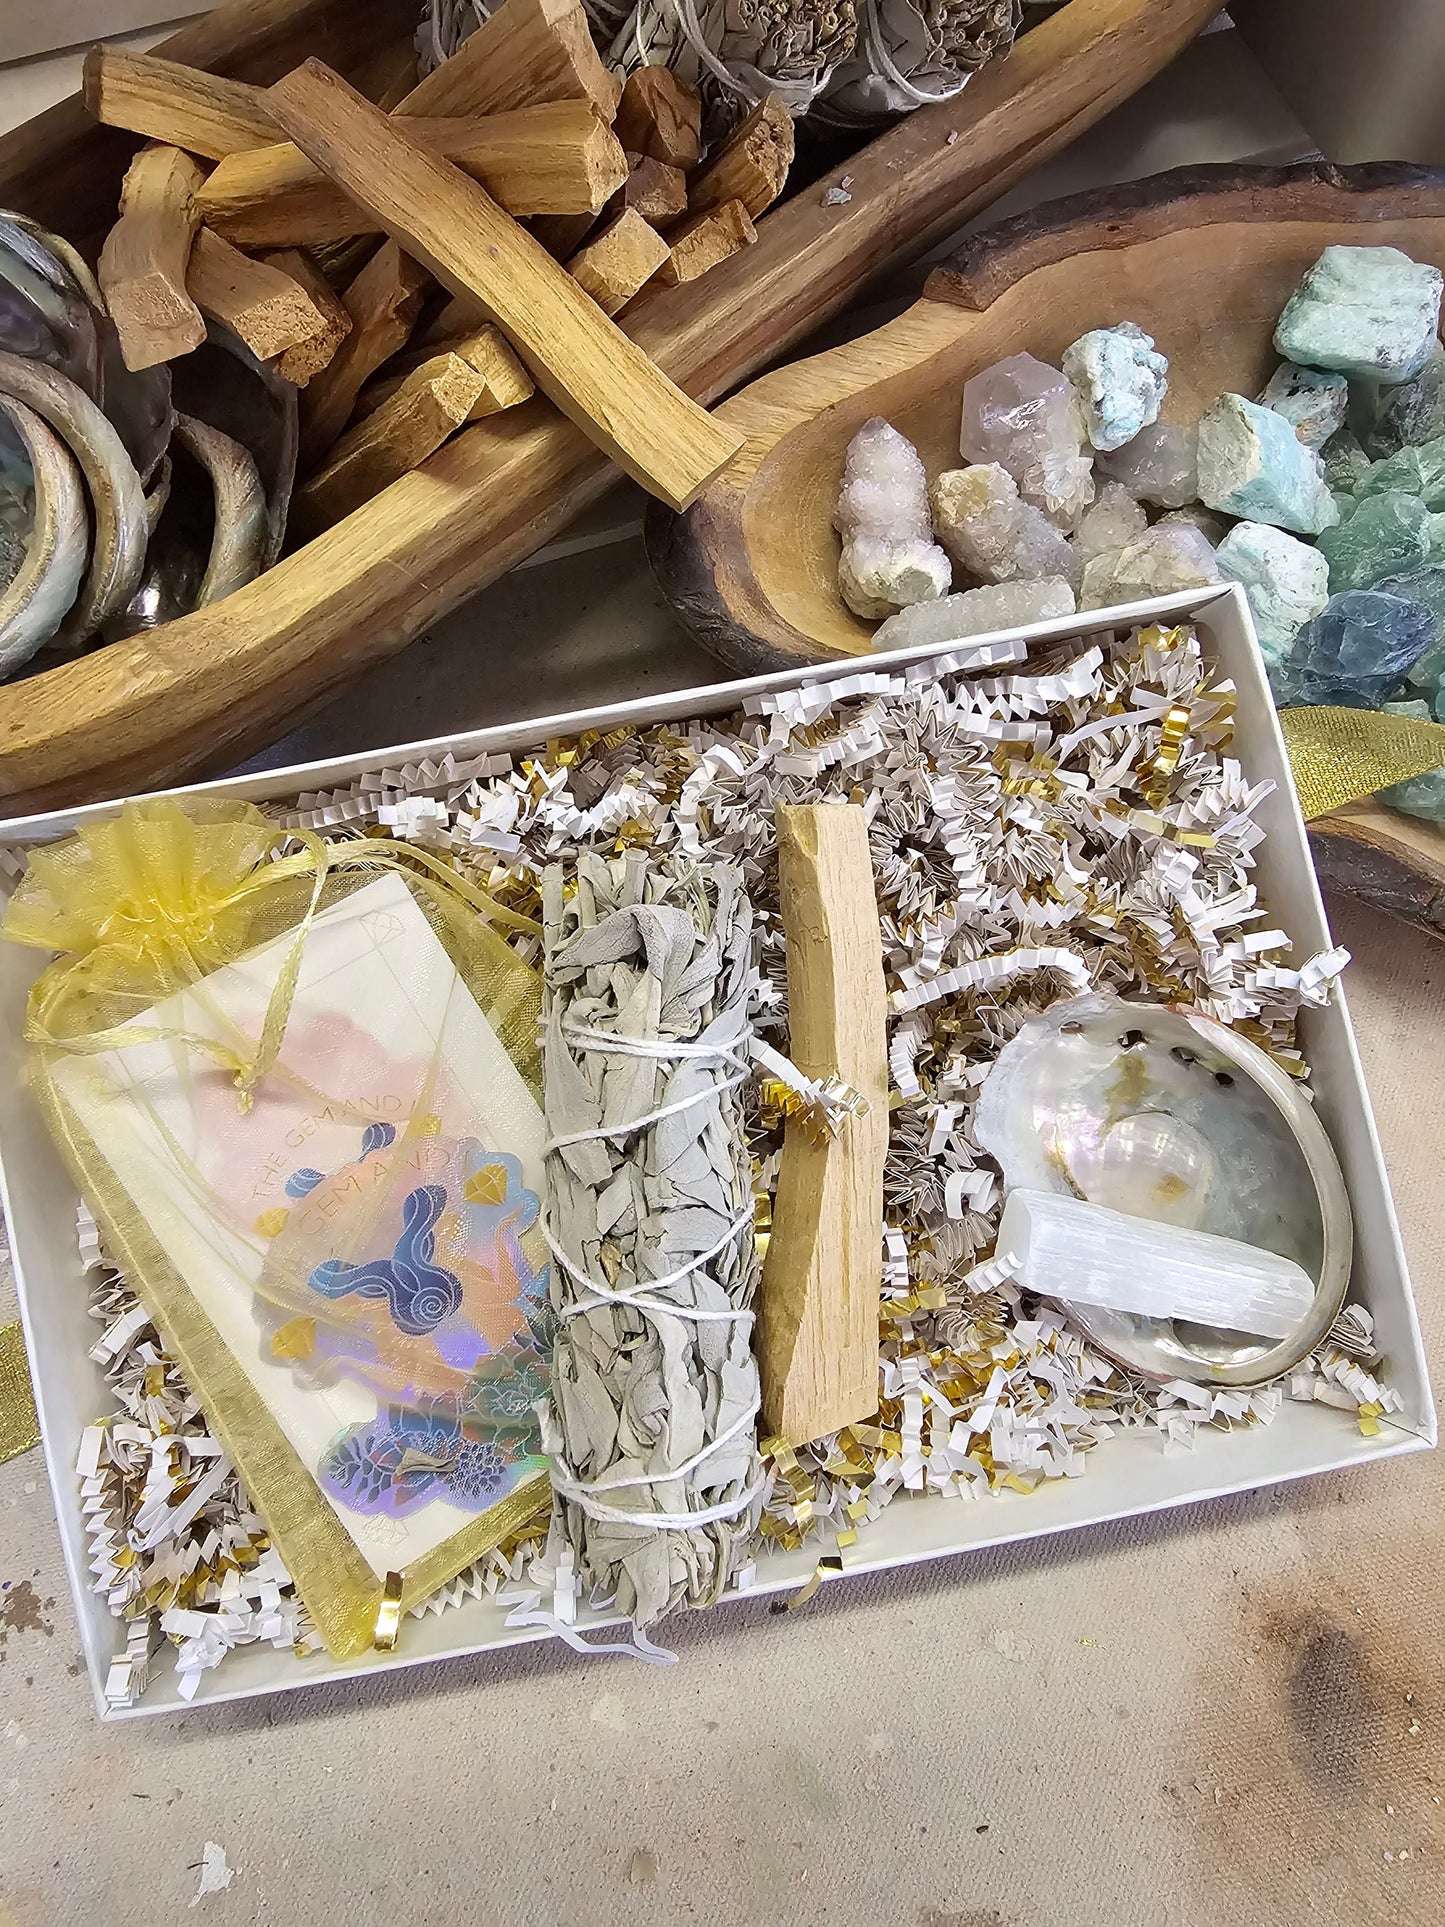 Load image into Gallery viewer, Customizable Healing Smudge Kit Gift Box for Holiday Present with Sage, Palo Santo, Abalone Shell, Selenite, and Crystals
